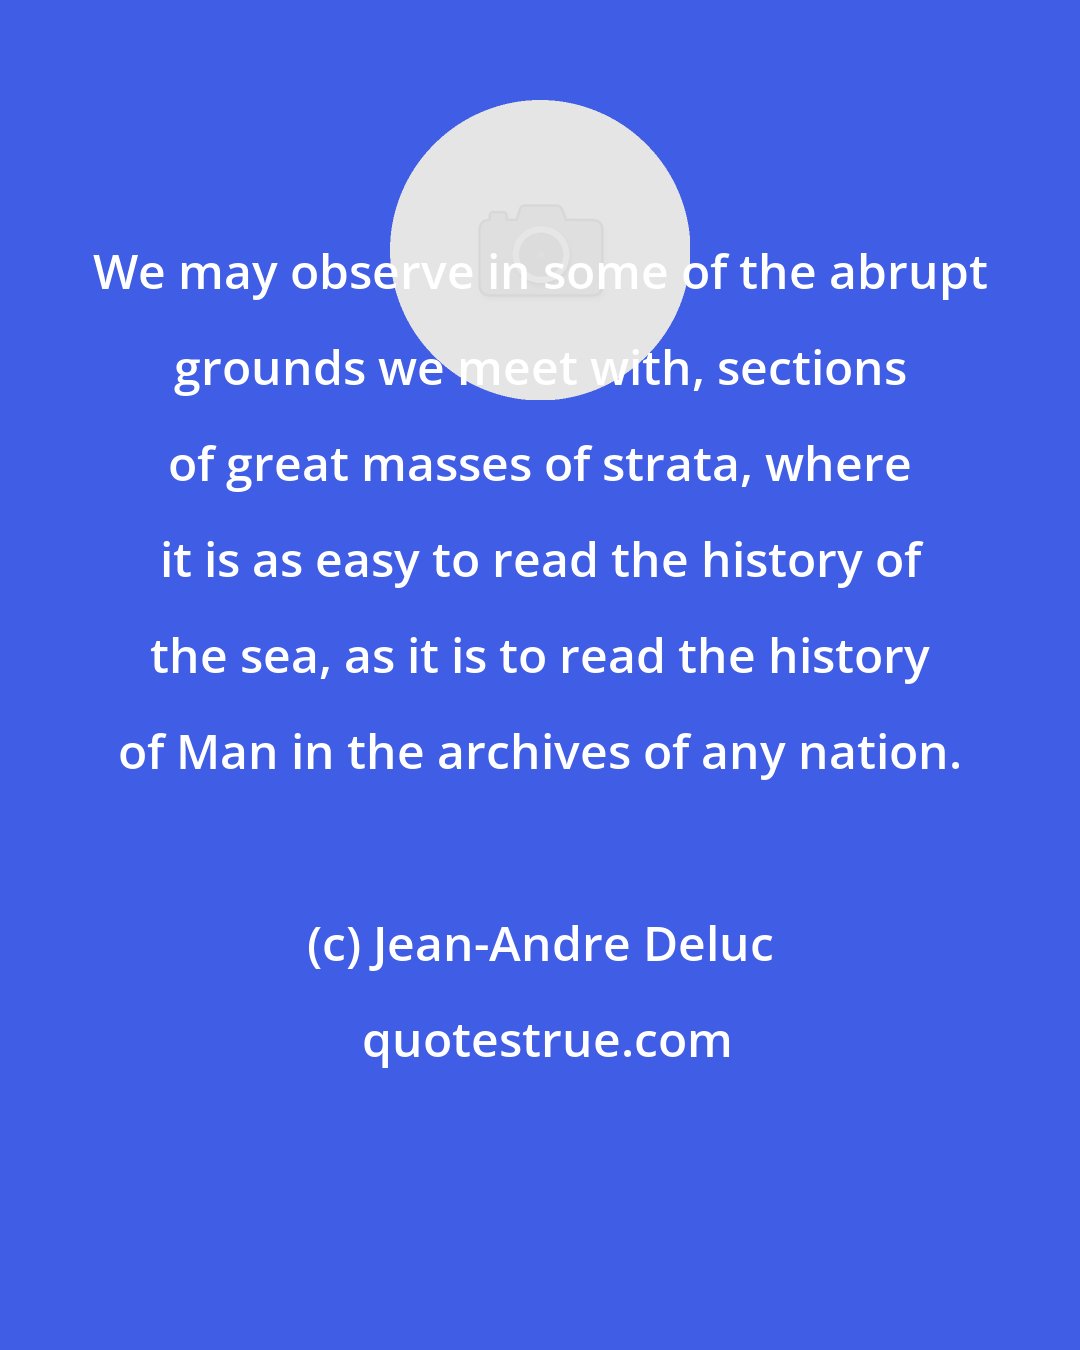 Jean-Andre Deluc: We may observe in some of the abrupt grounds we meet with, sections of great masses of strata, where it is as easy to read the history of the sea, as it is to read the history of Man in the archives of any nation.